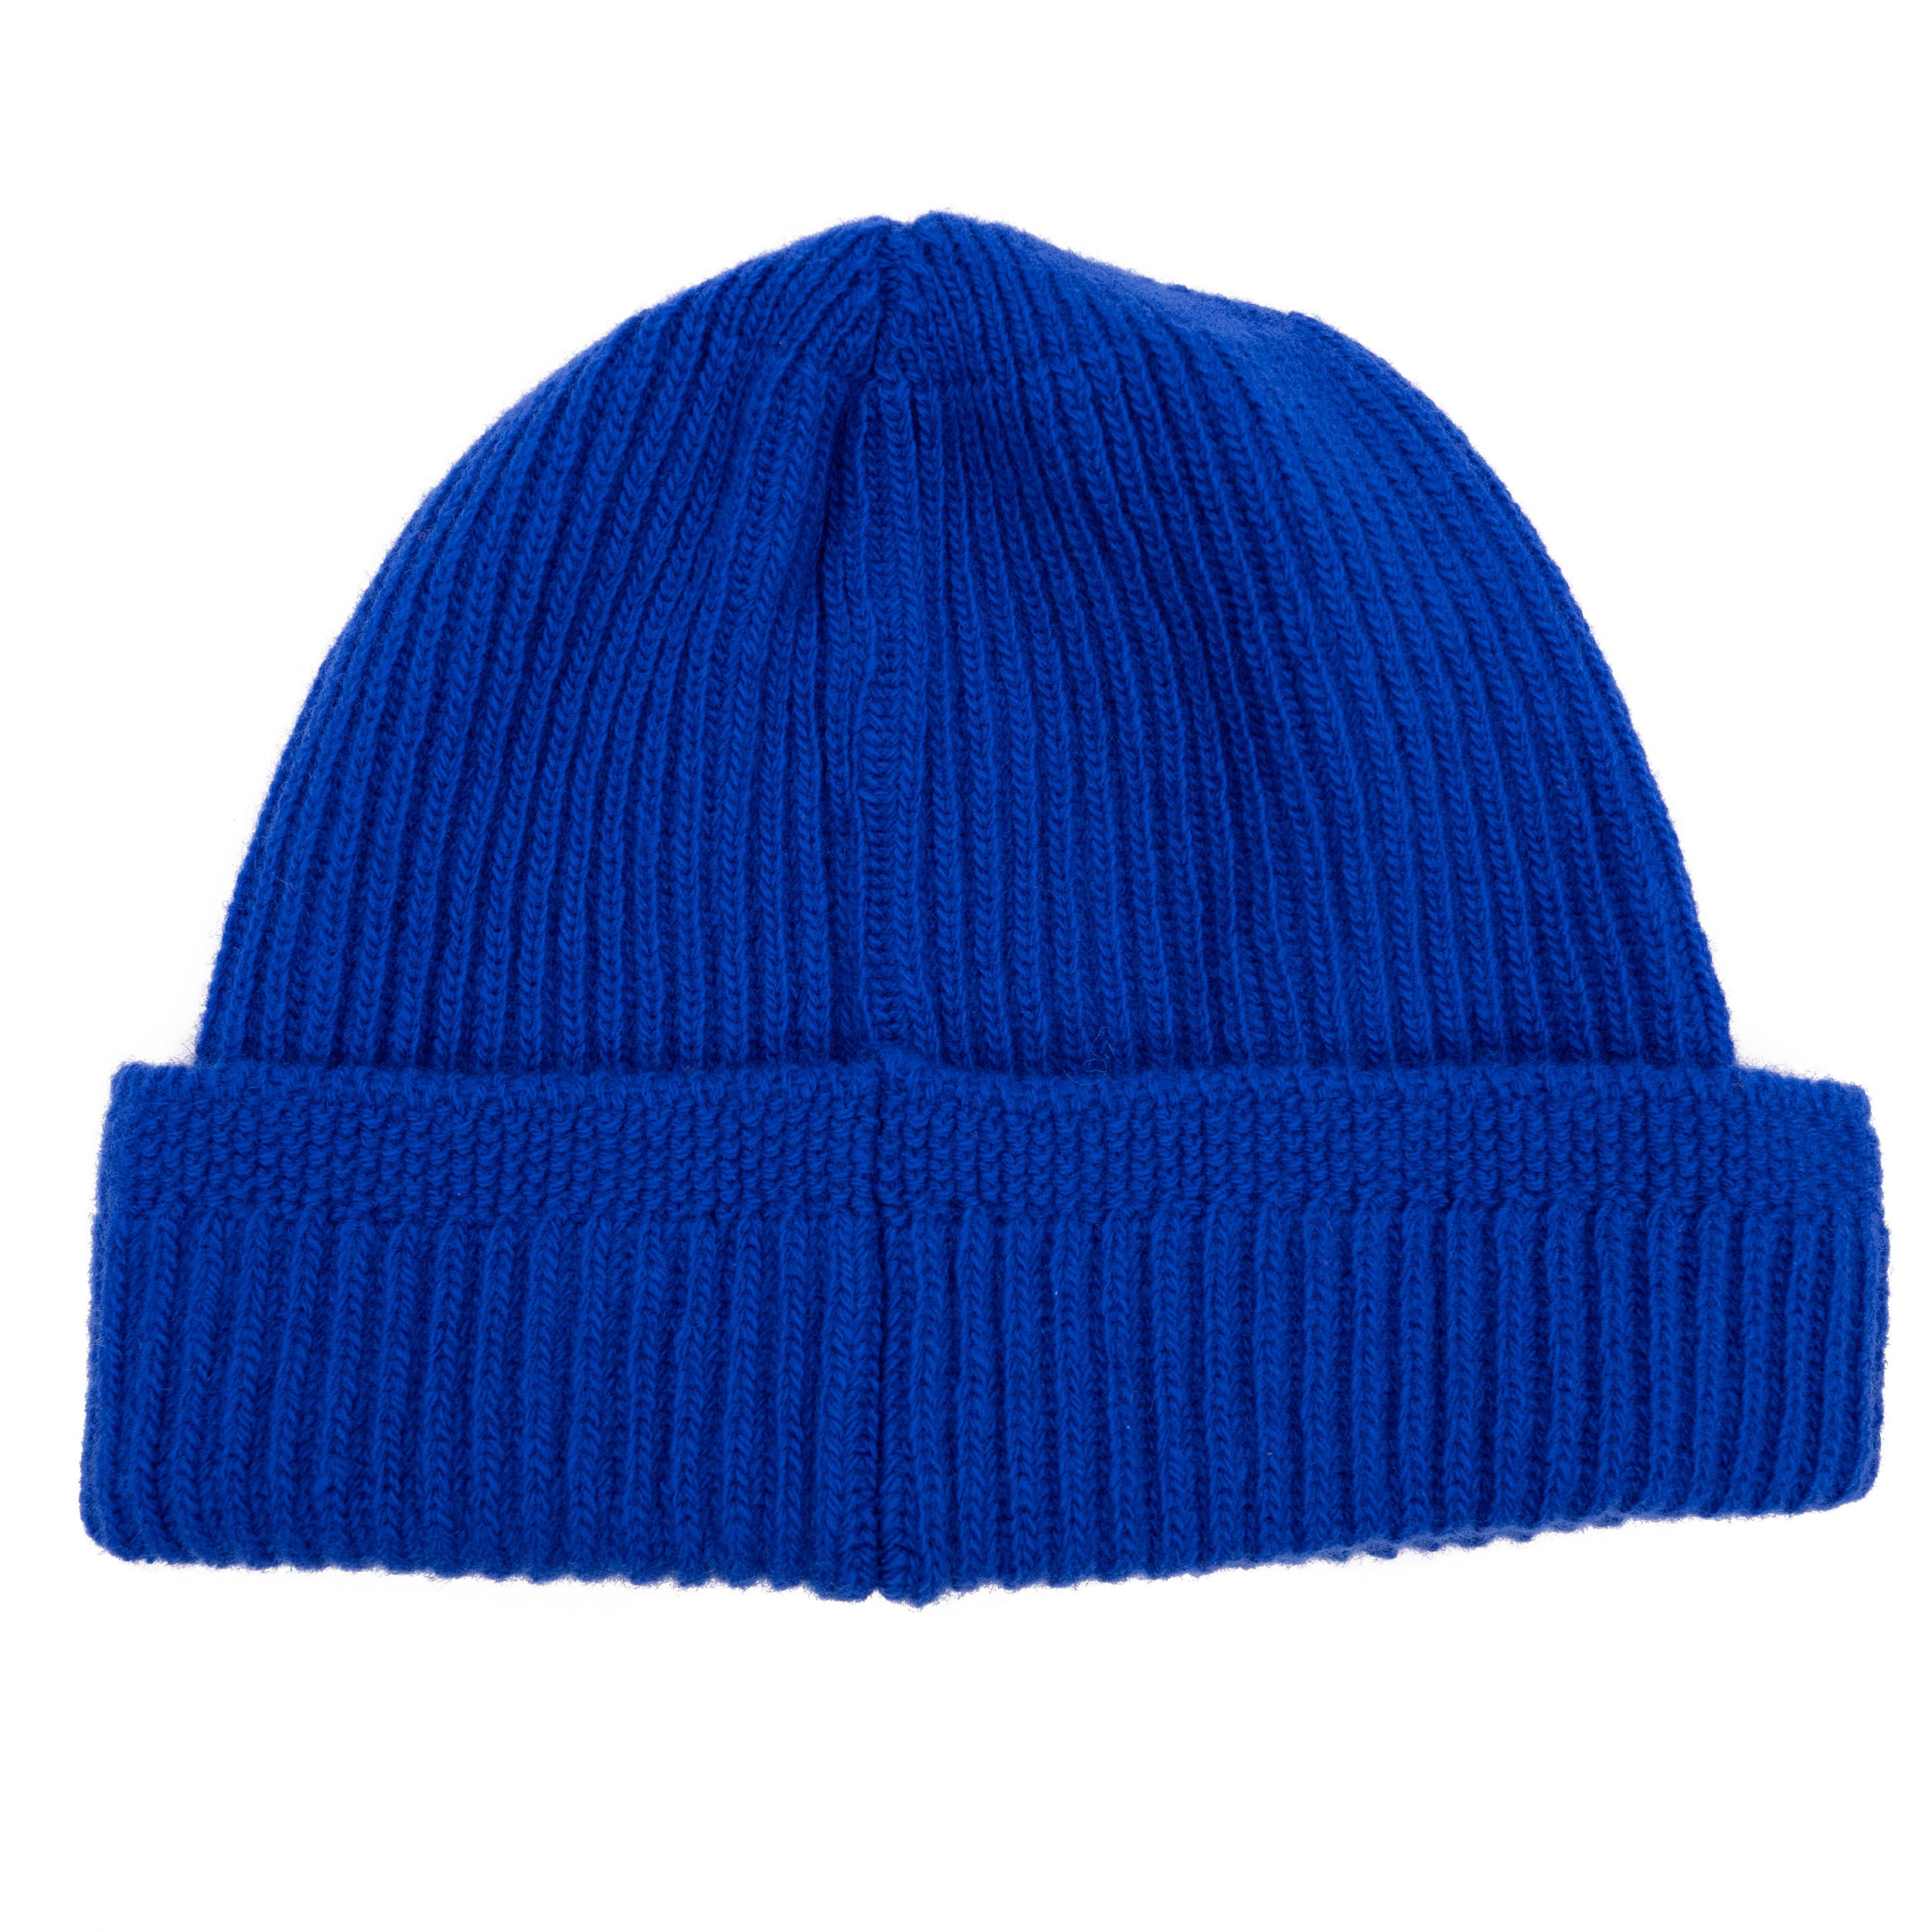 Carrier Company Wool Hat in Marine